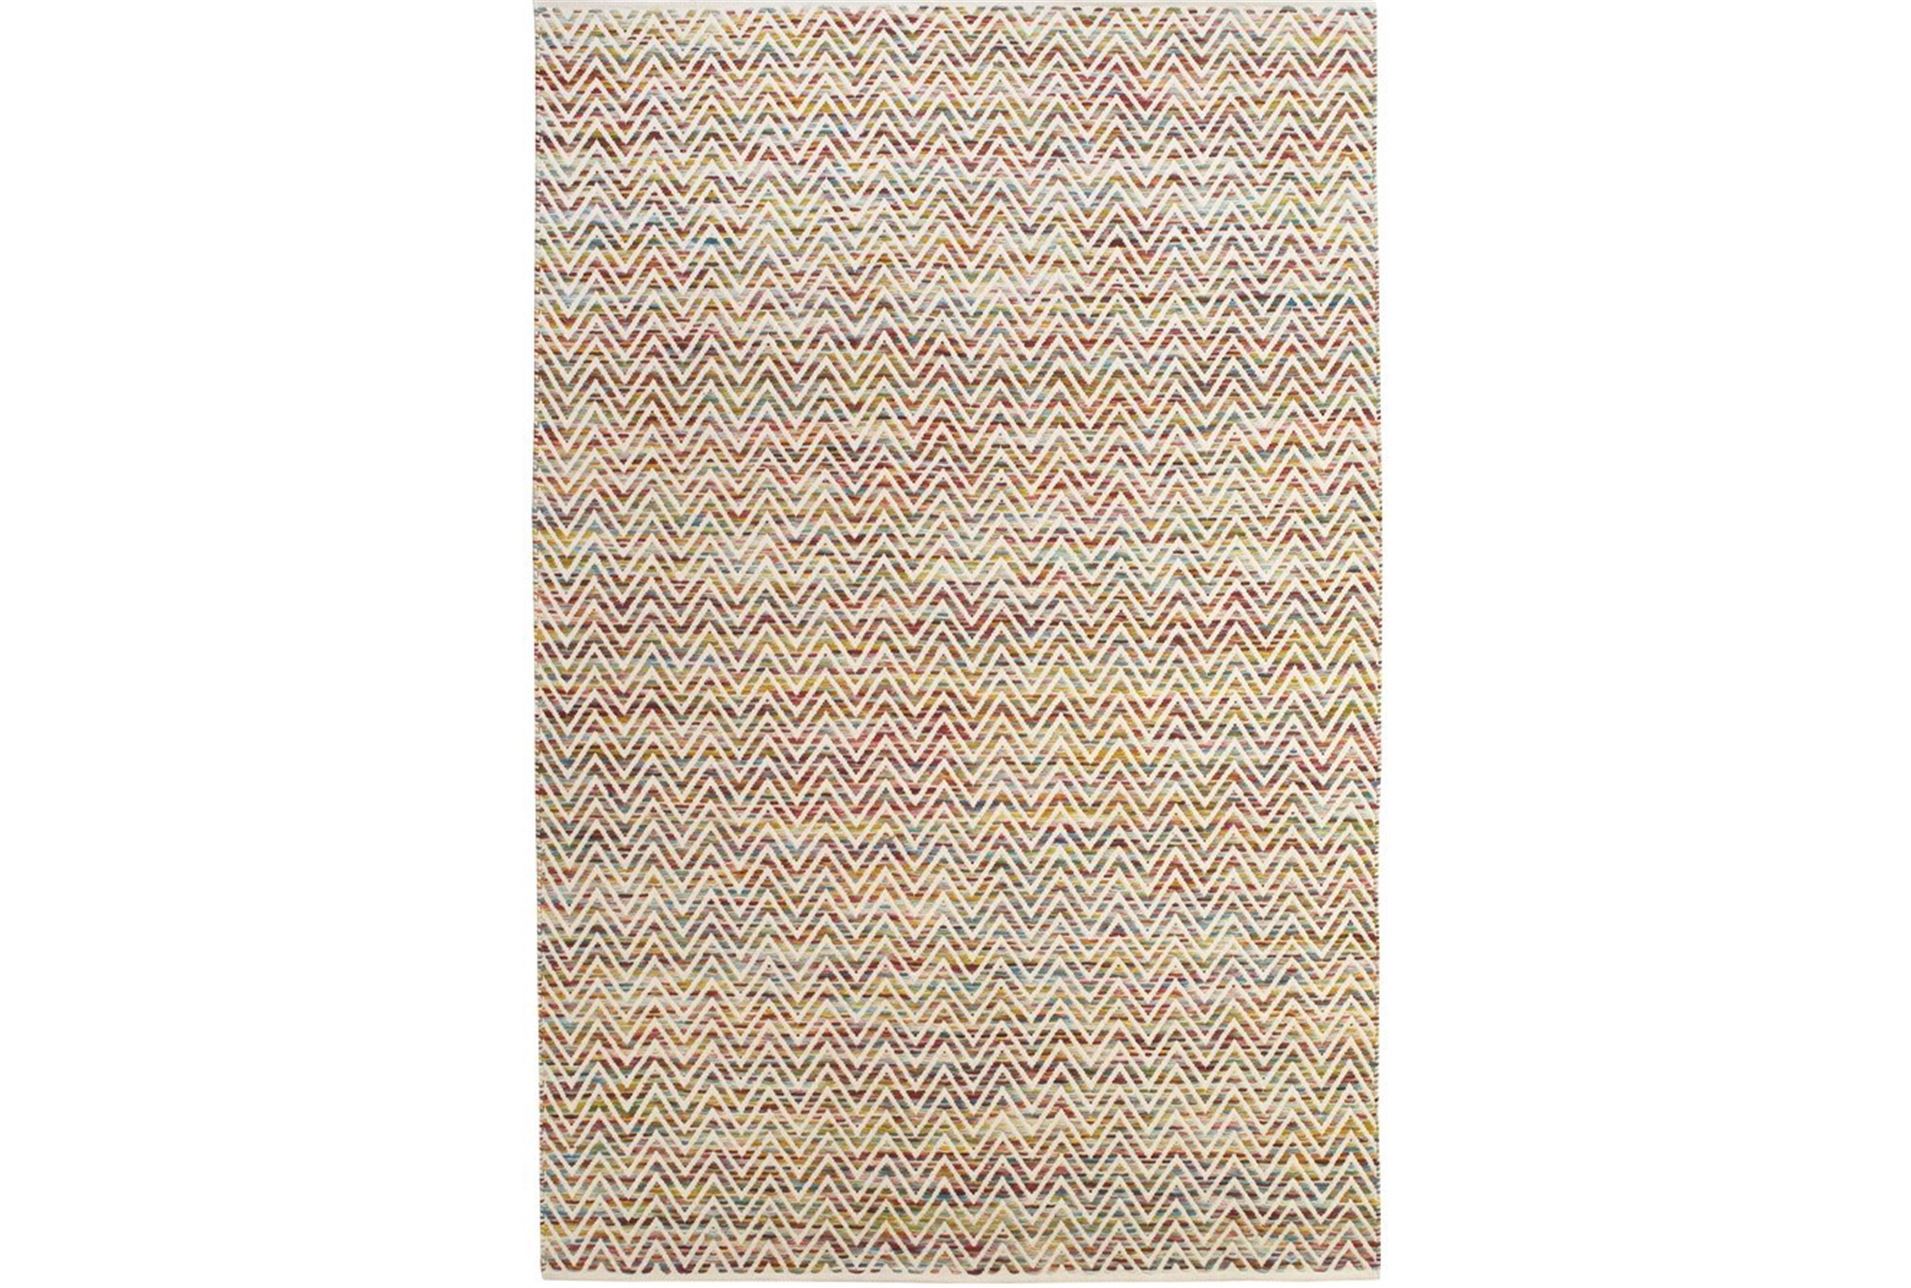 8x10 Area Rugs to Fit Your Home Decor